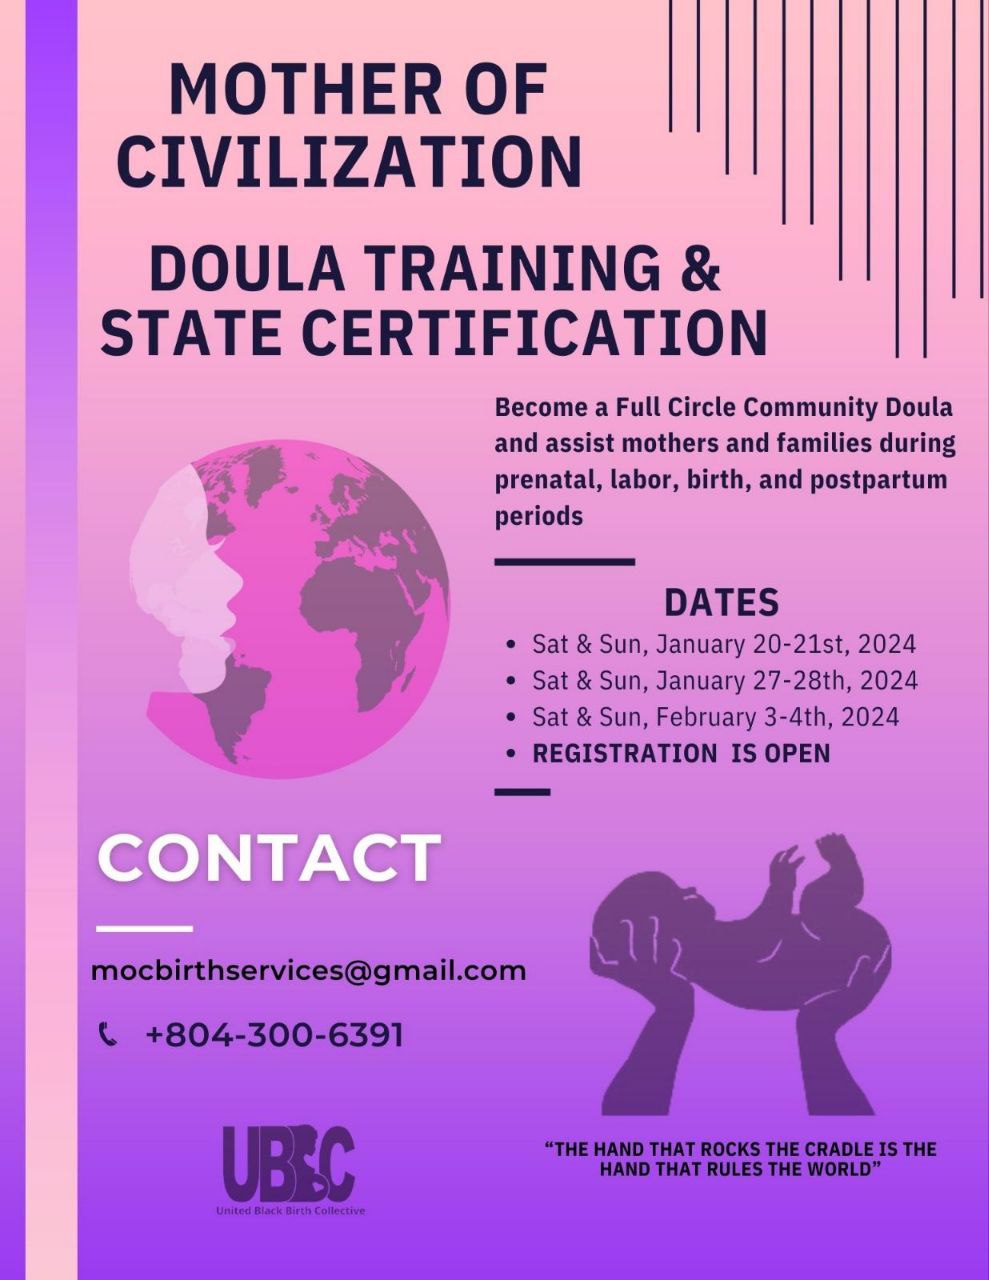 MOTHER OF CIVILIZATION DOULA TRAINING & STATE CERTIFICATION